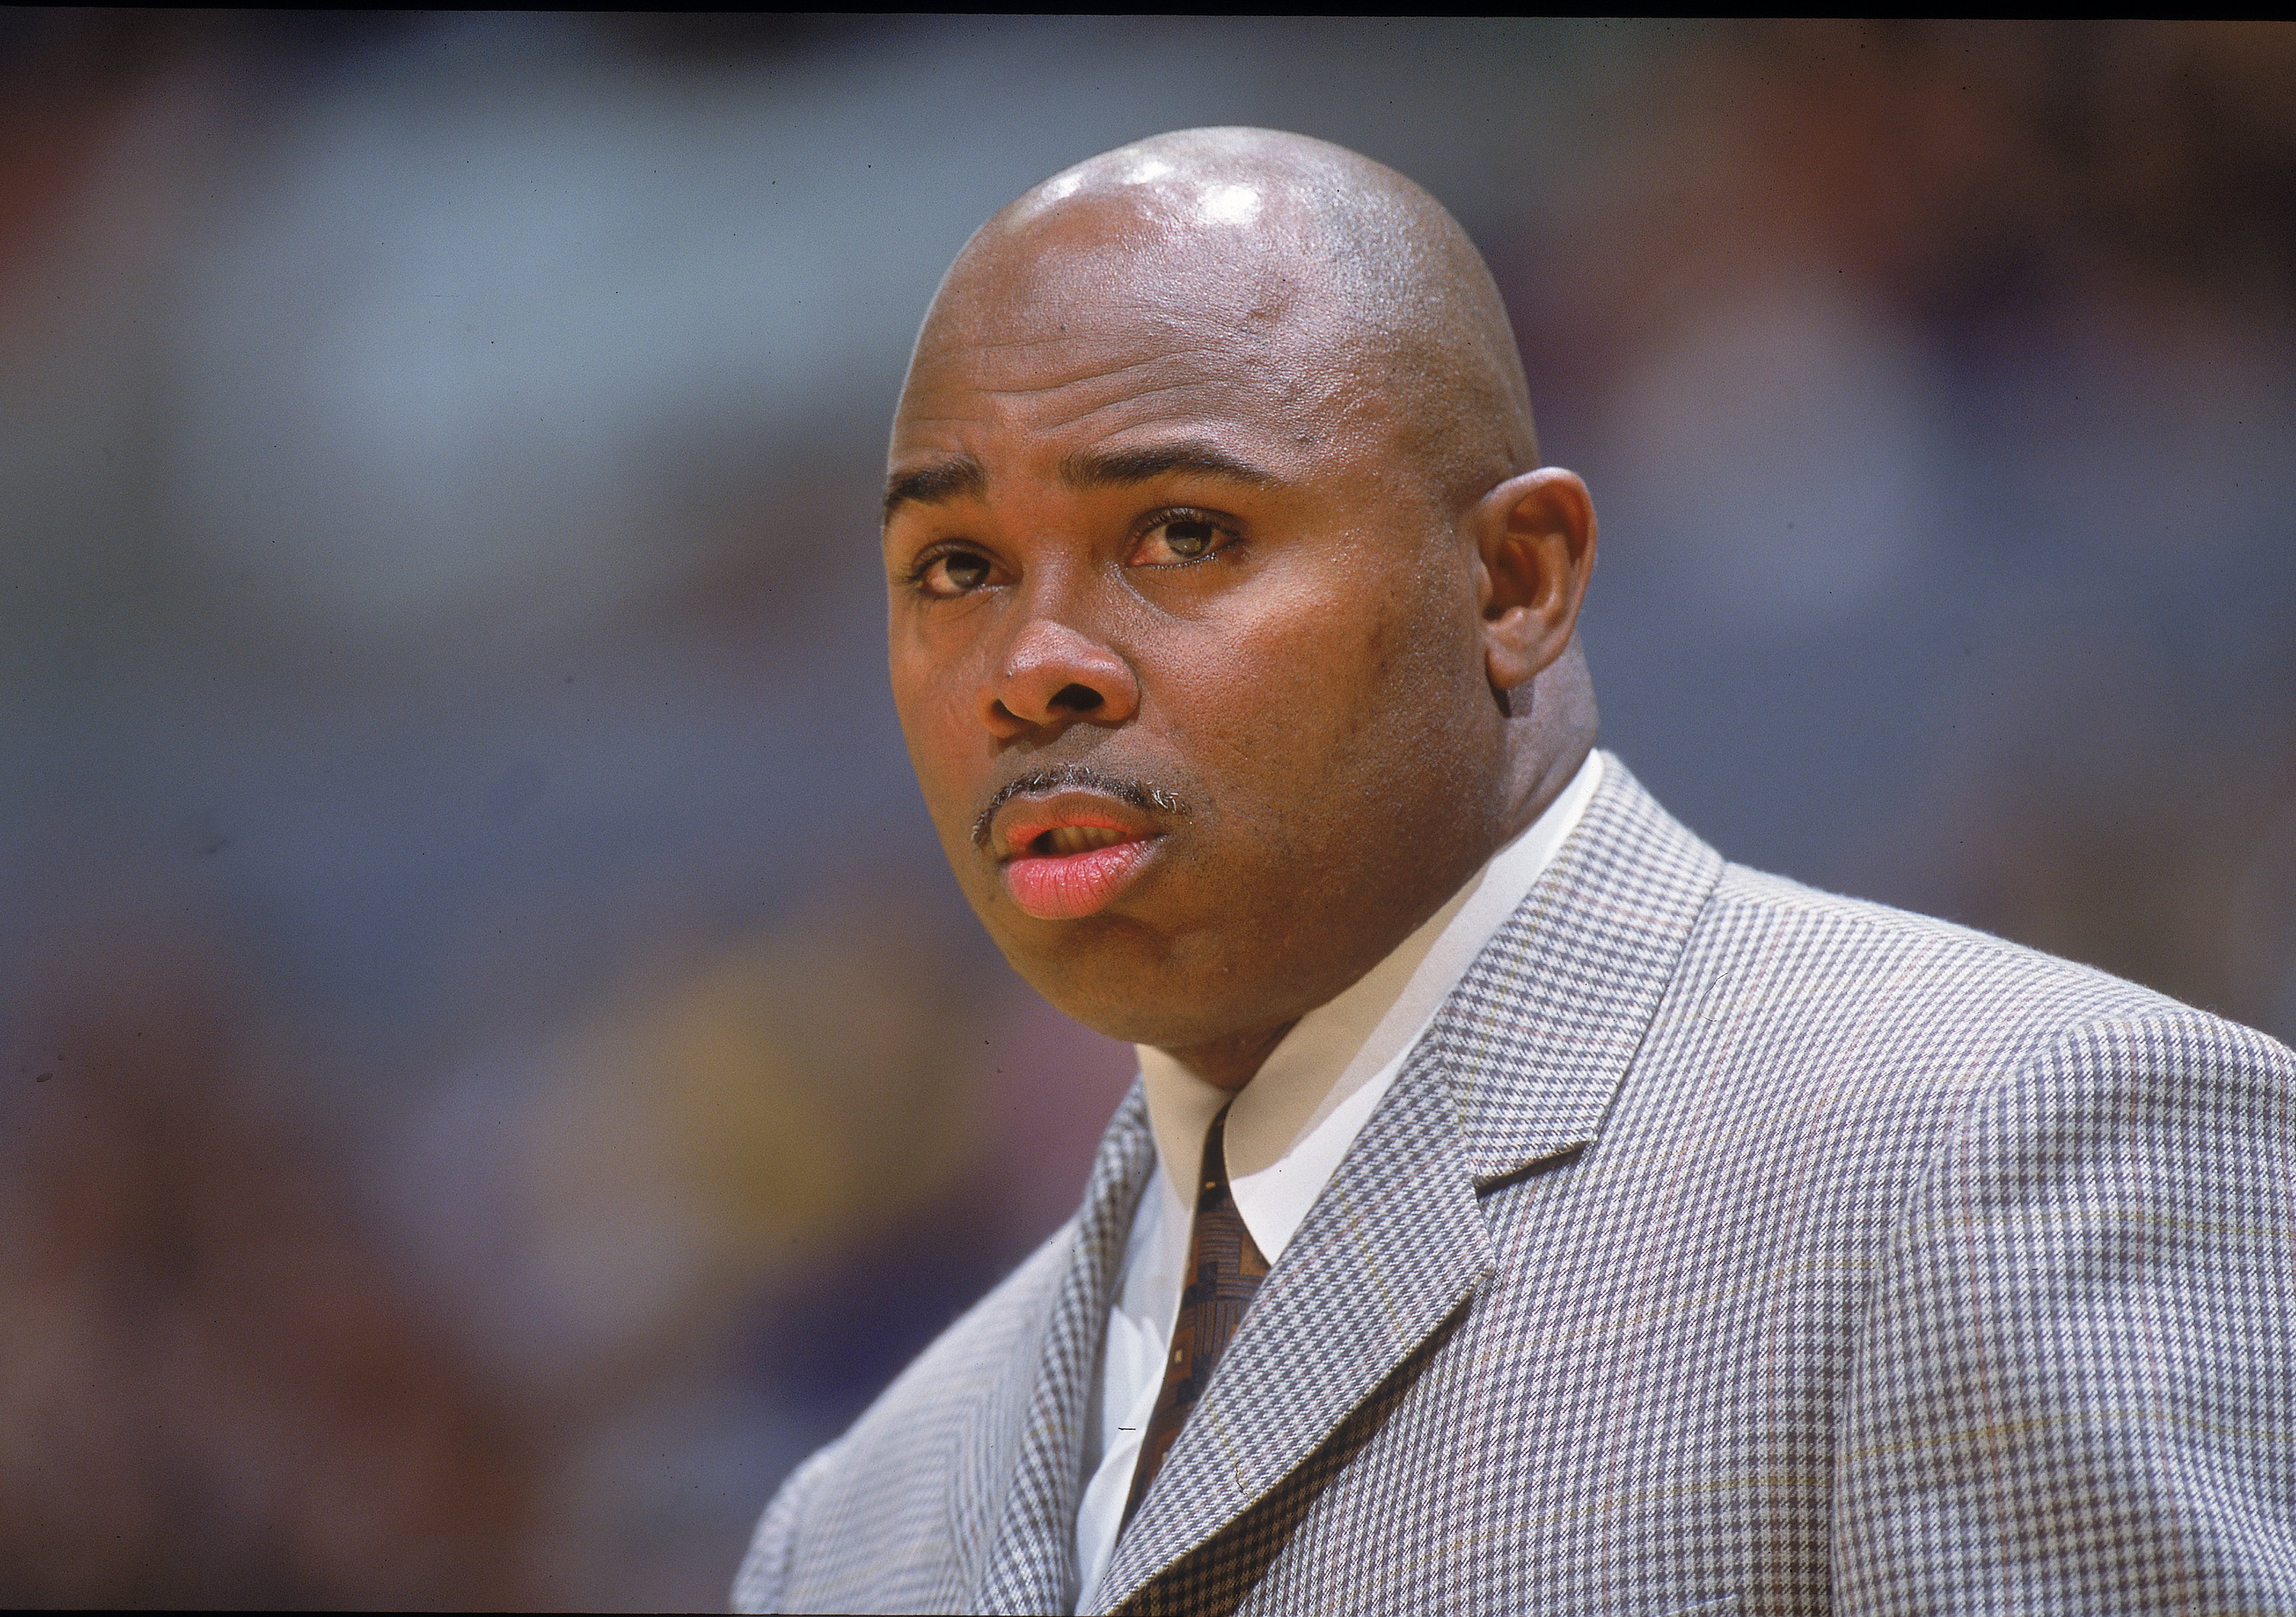 15 Dec 2000:   Head Coach Sydney Lowe of the Vancouver Grizzlies looks on from the sidelines during the game against the Los Angeles Lakers at the STAPLES Center in Los Angeles, California.  The Lakers defeated the Grizzlies 92-90.     NOTE TO USER: It is